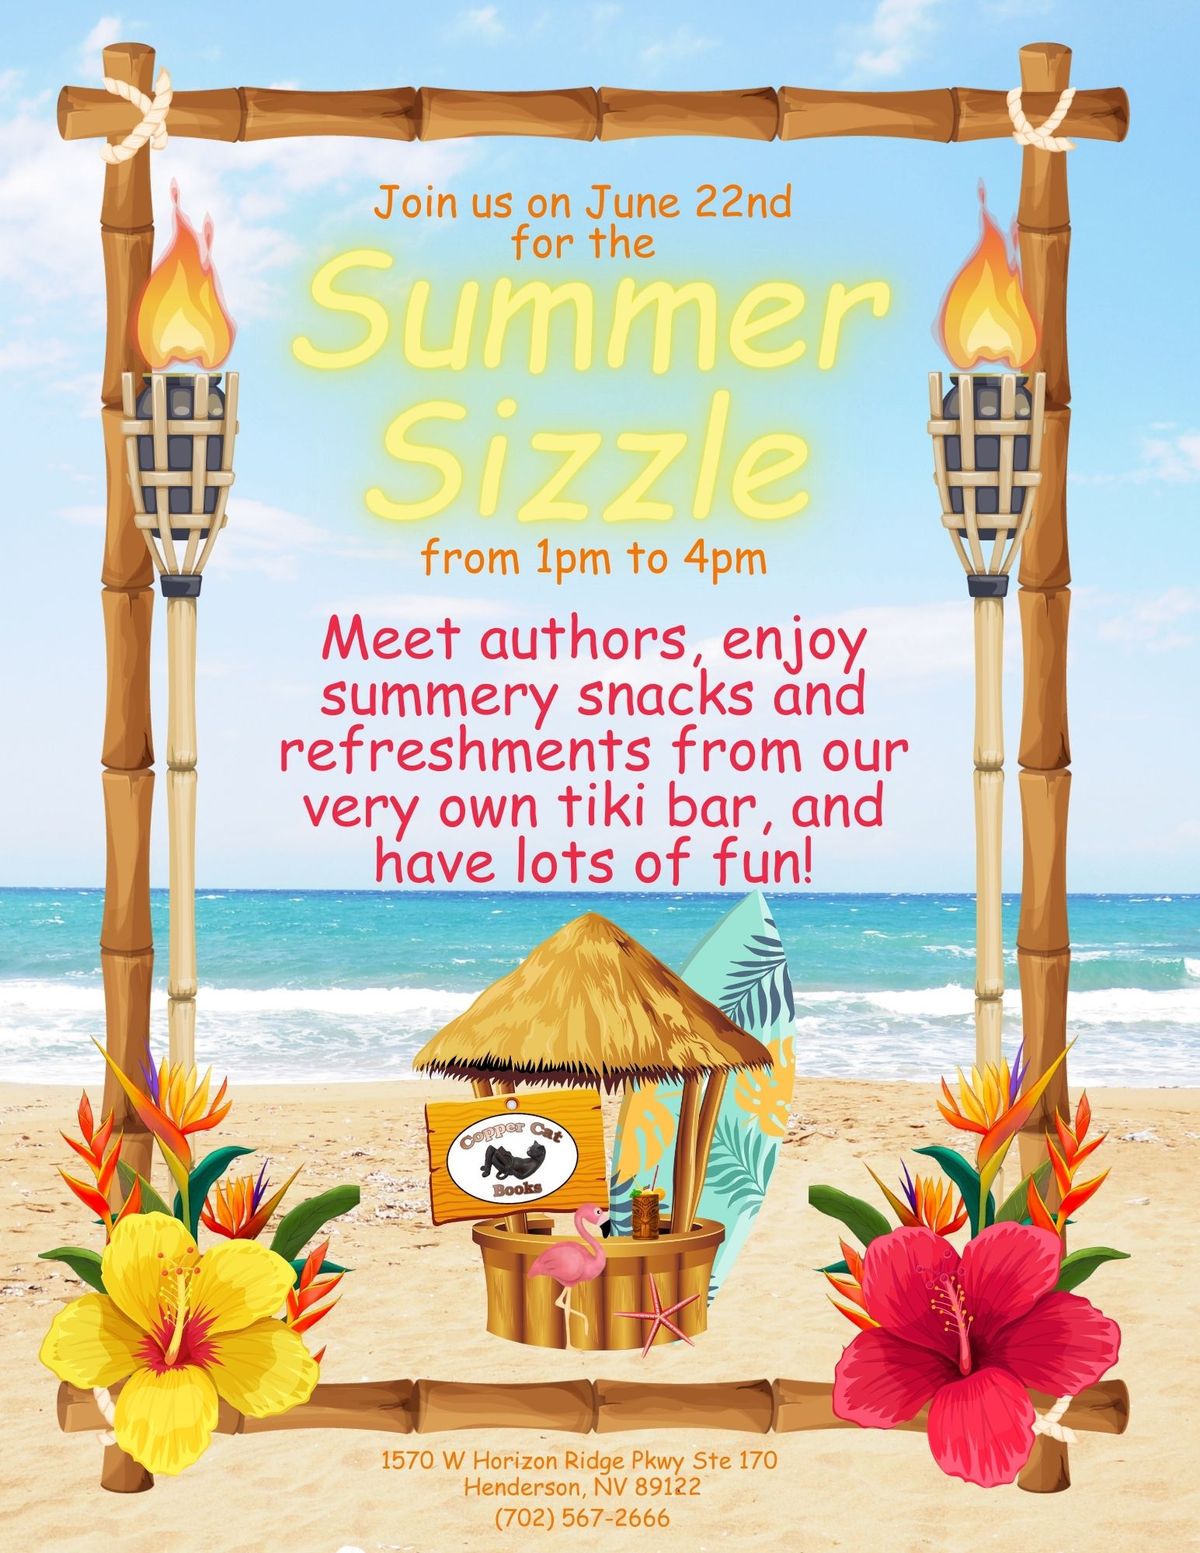 Summer Sizzle, authors, refreshments, music and fun!!!